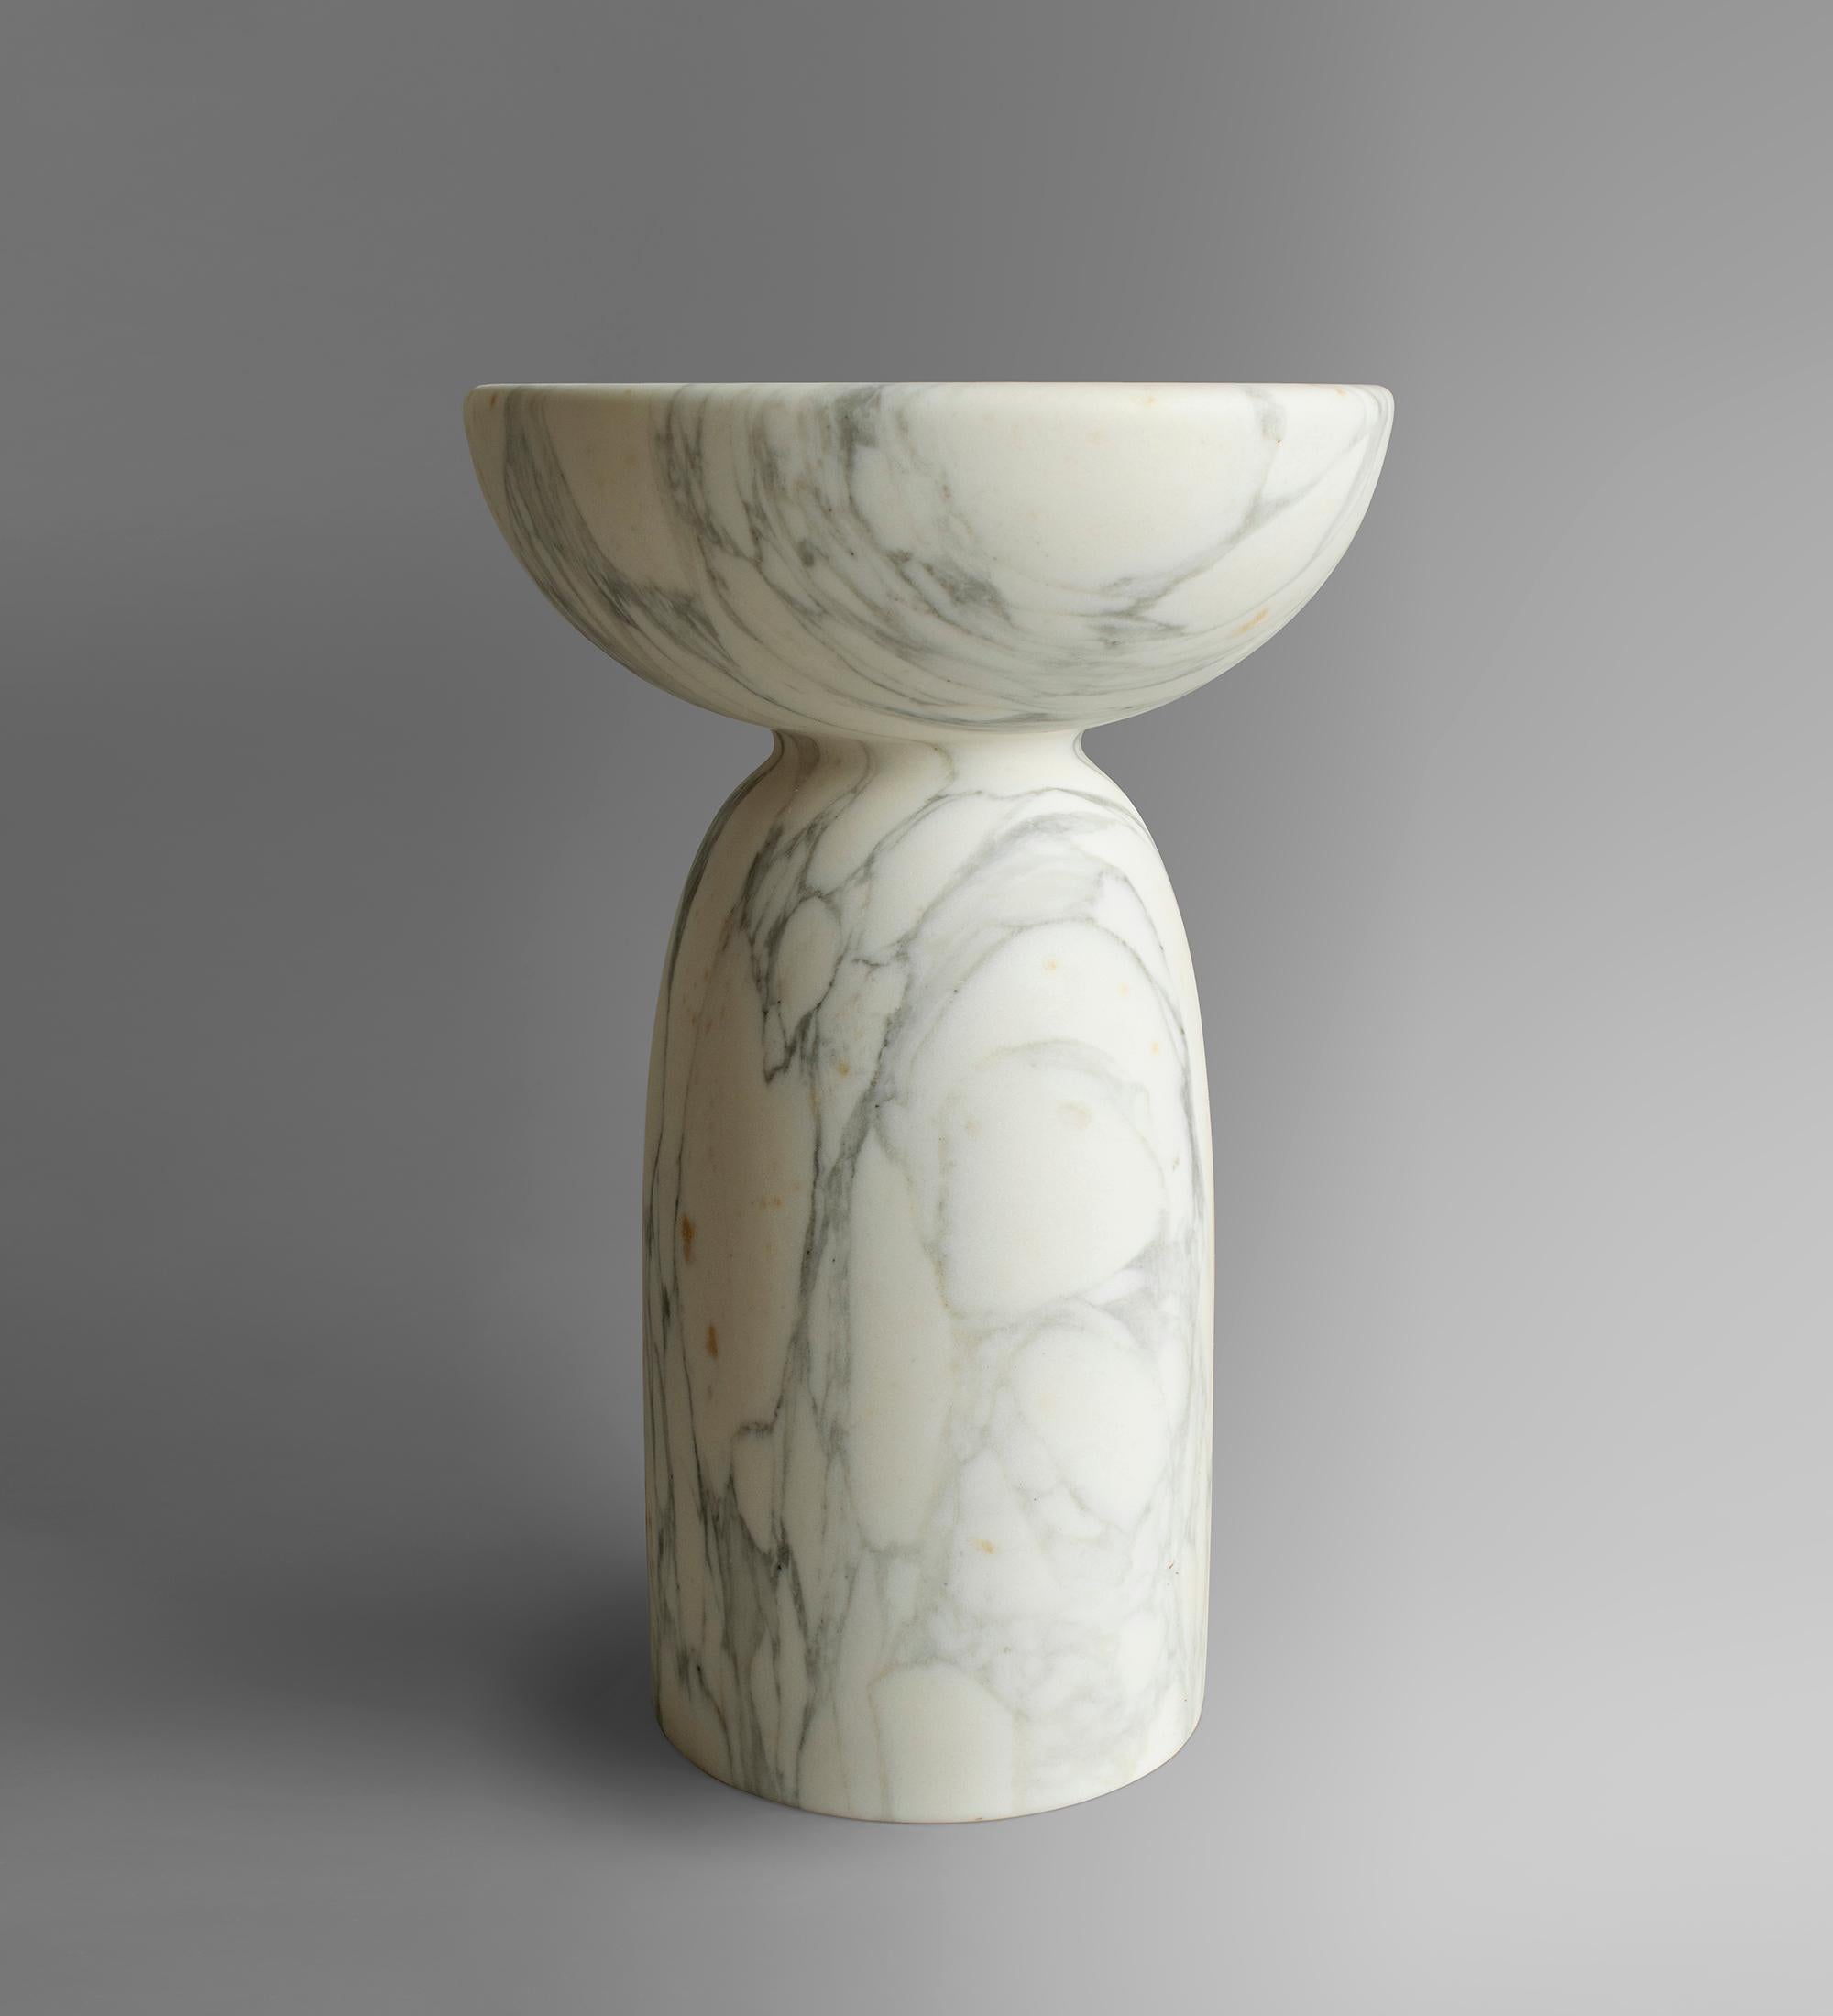 Pawn 2 Calacatta Marble Side Table & Stool by Etamorph
Dimensions: Ø 30 x H 40 cm.
Materials: Calacatta Marble.

Available in different stone options. Also available in different shapes. Please contact us. 

ETAMORPH is a NYC-based design boutique